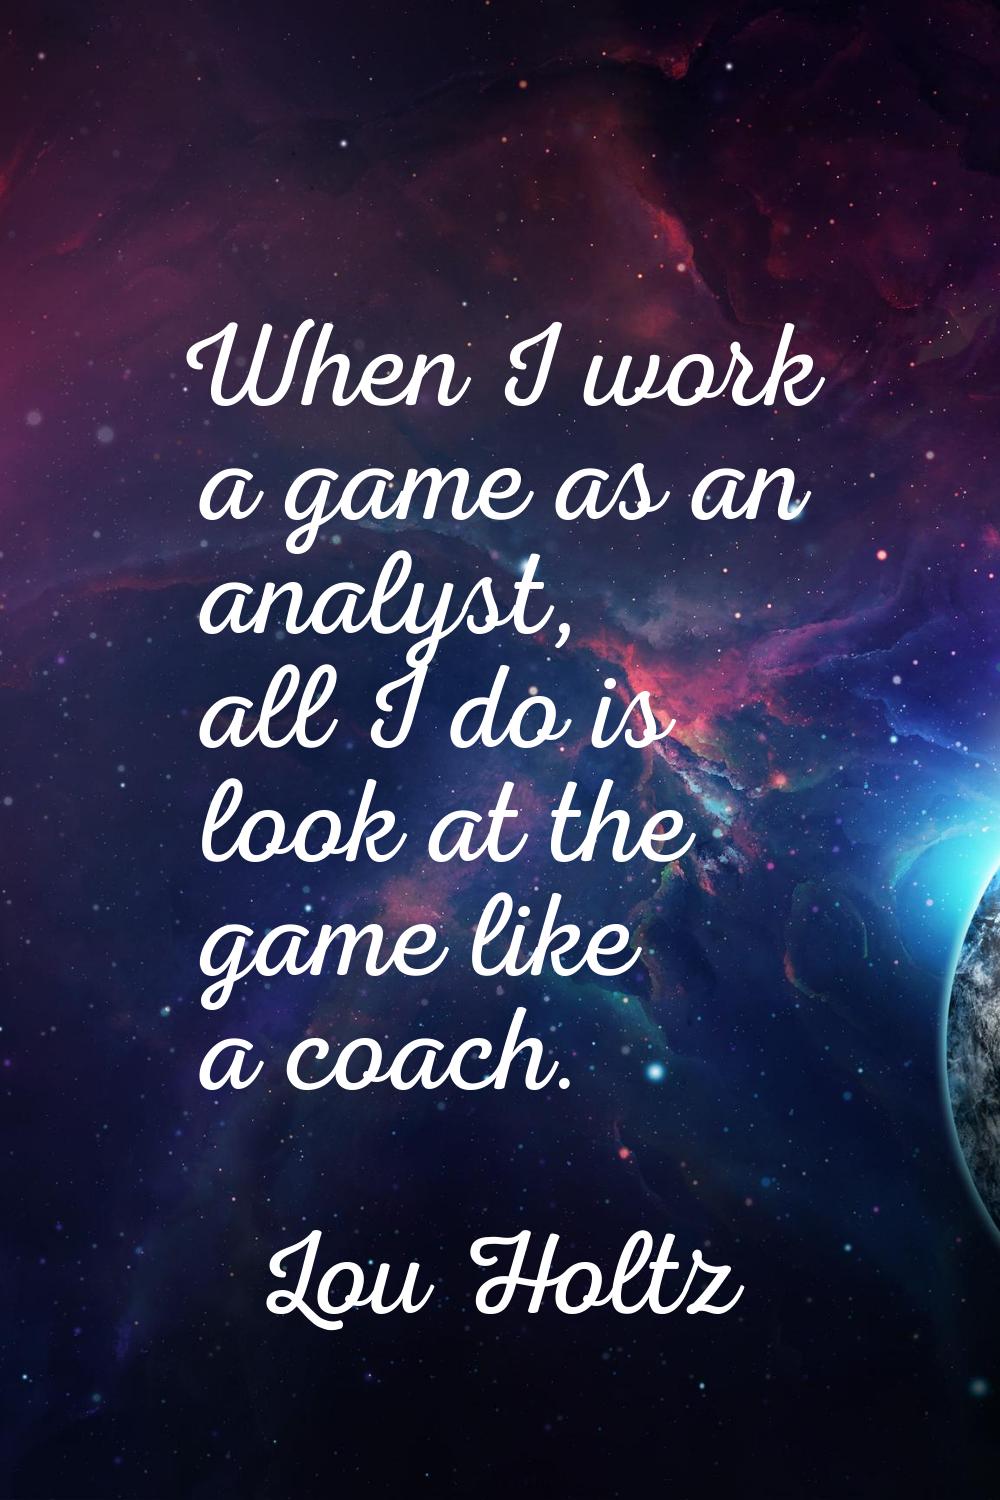 When I work a game as an analyst, all I do is look at the game like a coach.